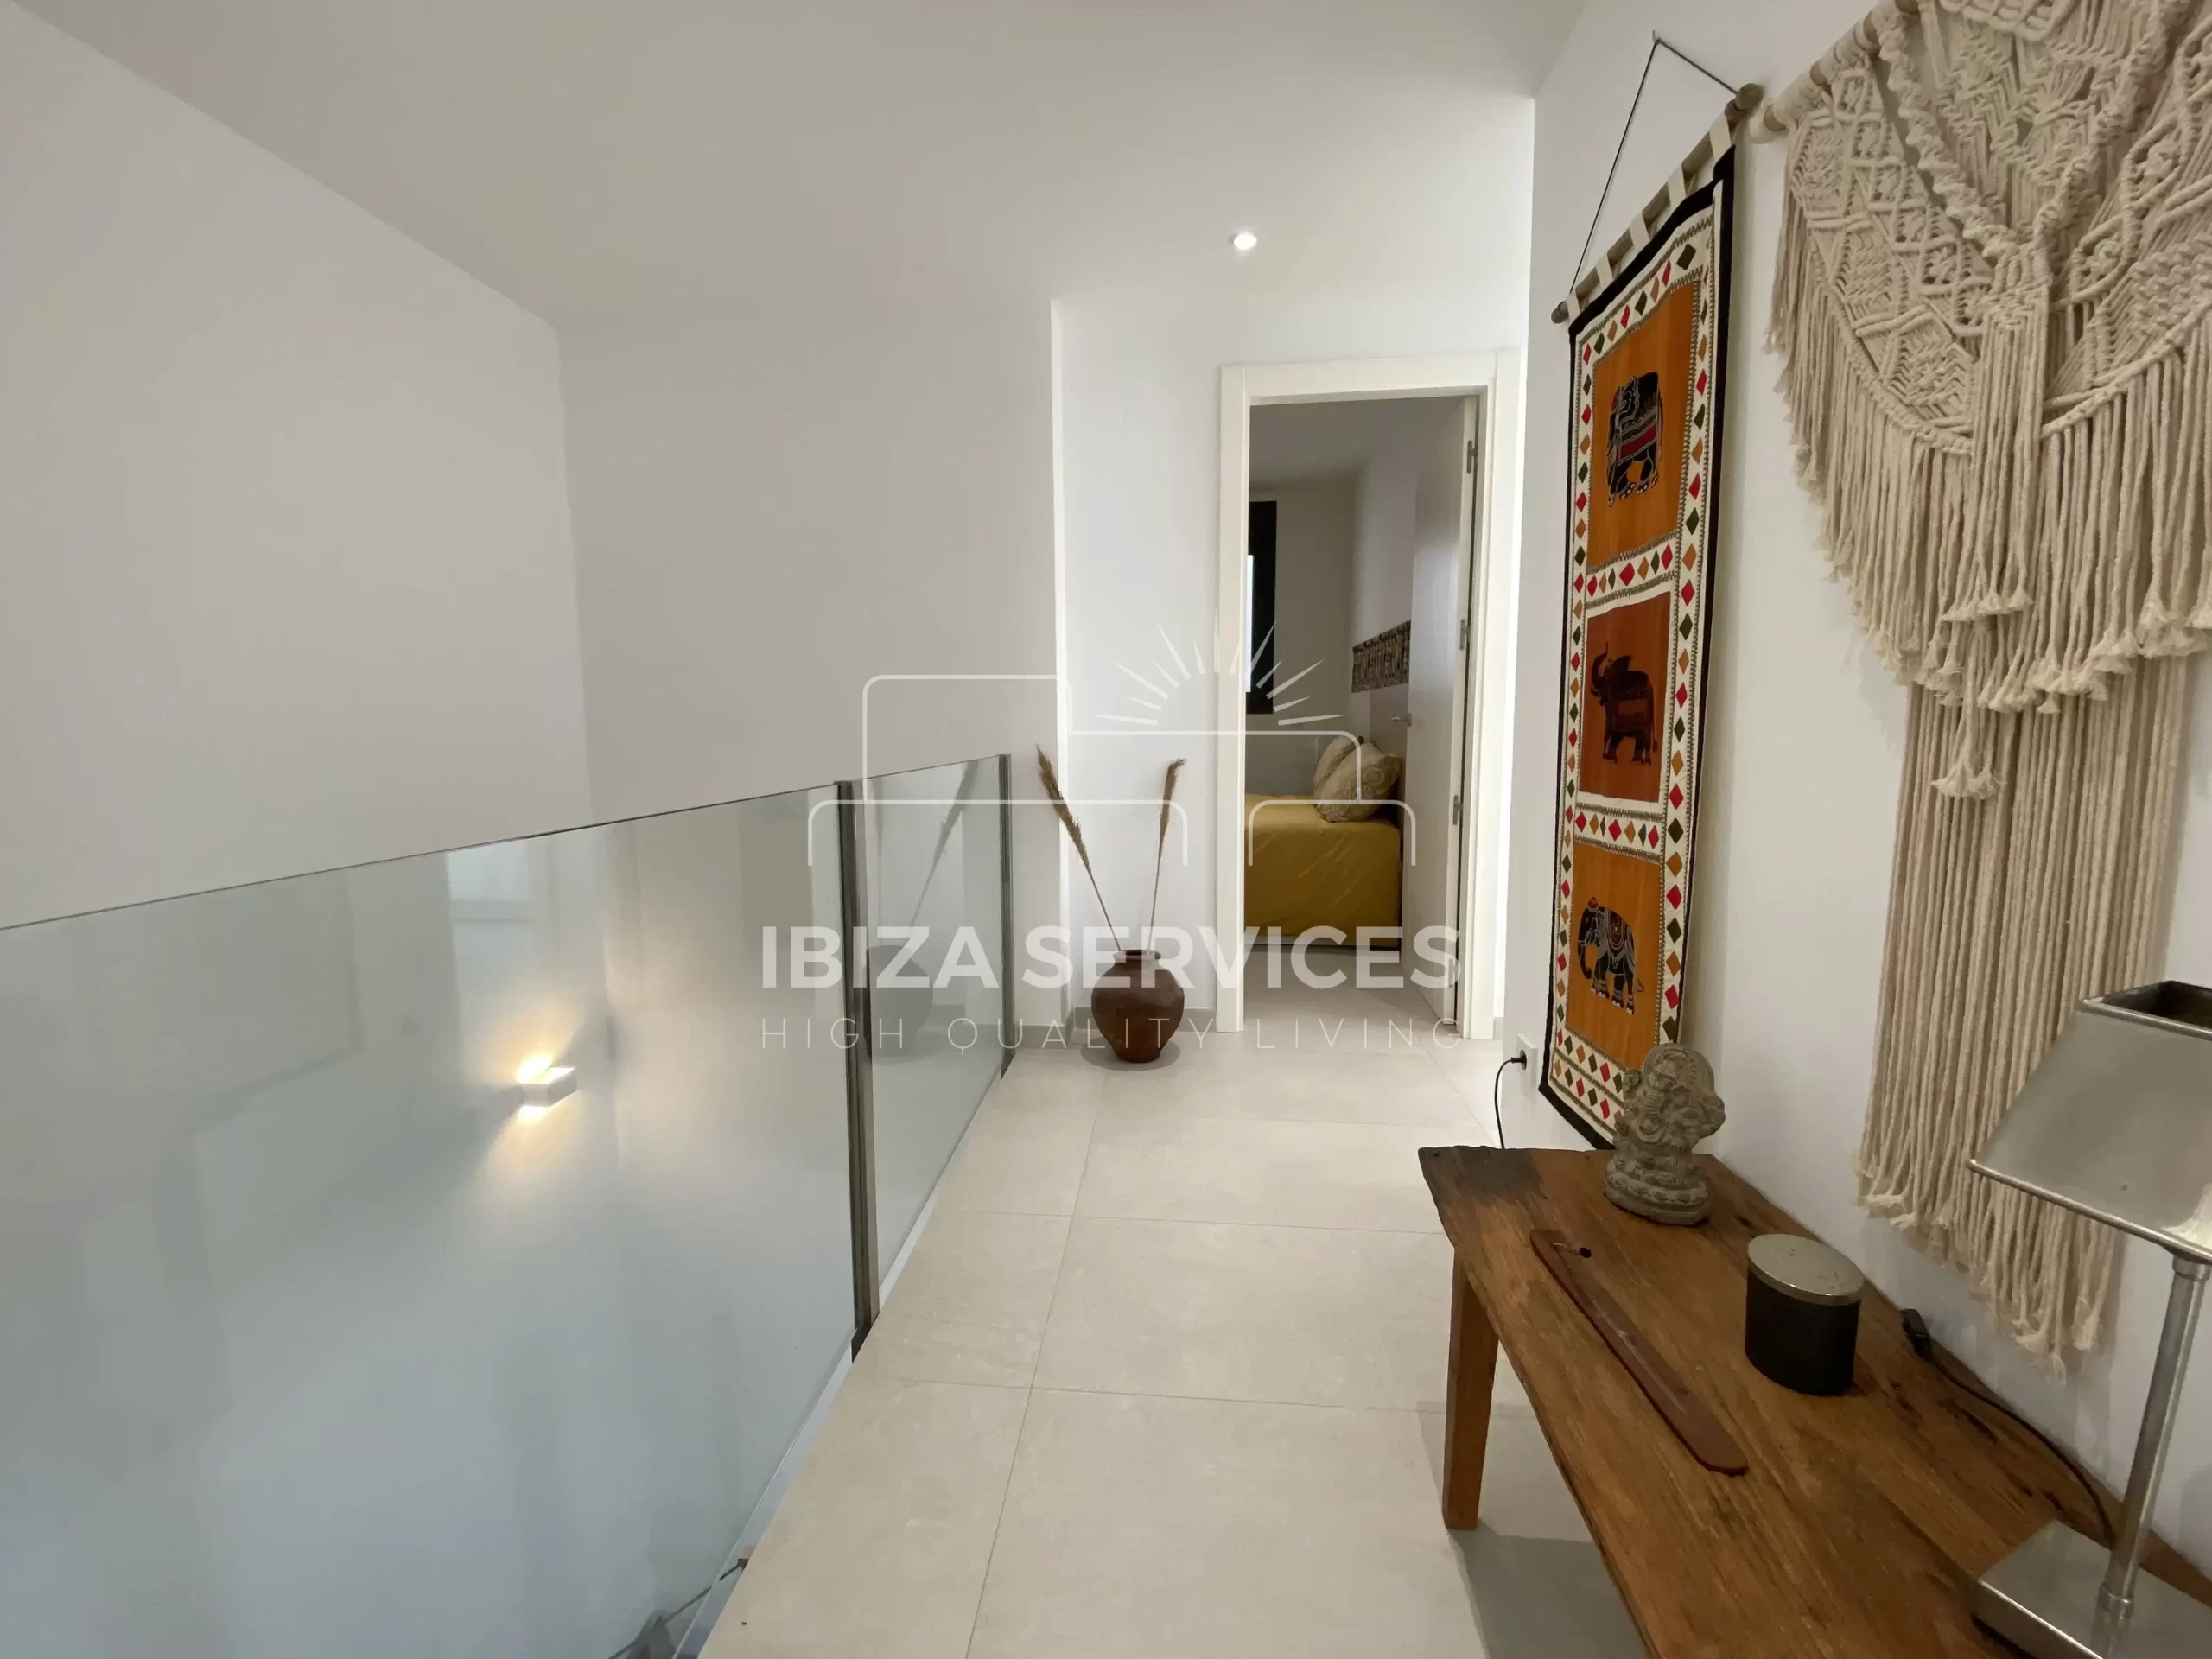 Duplex with 150m, terrace, and communal swimming pool near the beach for sale